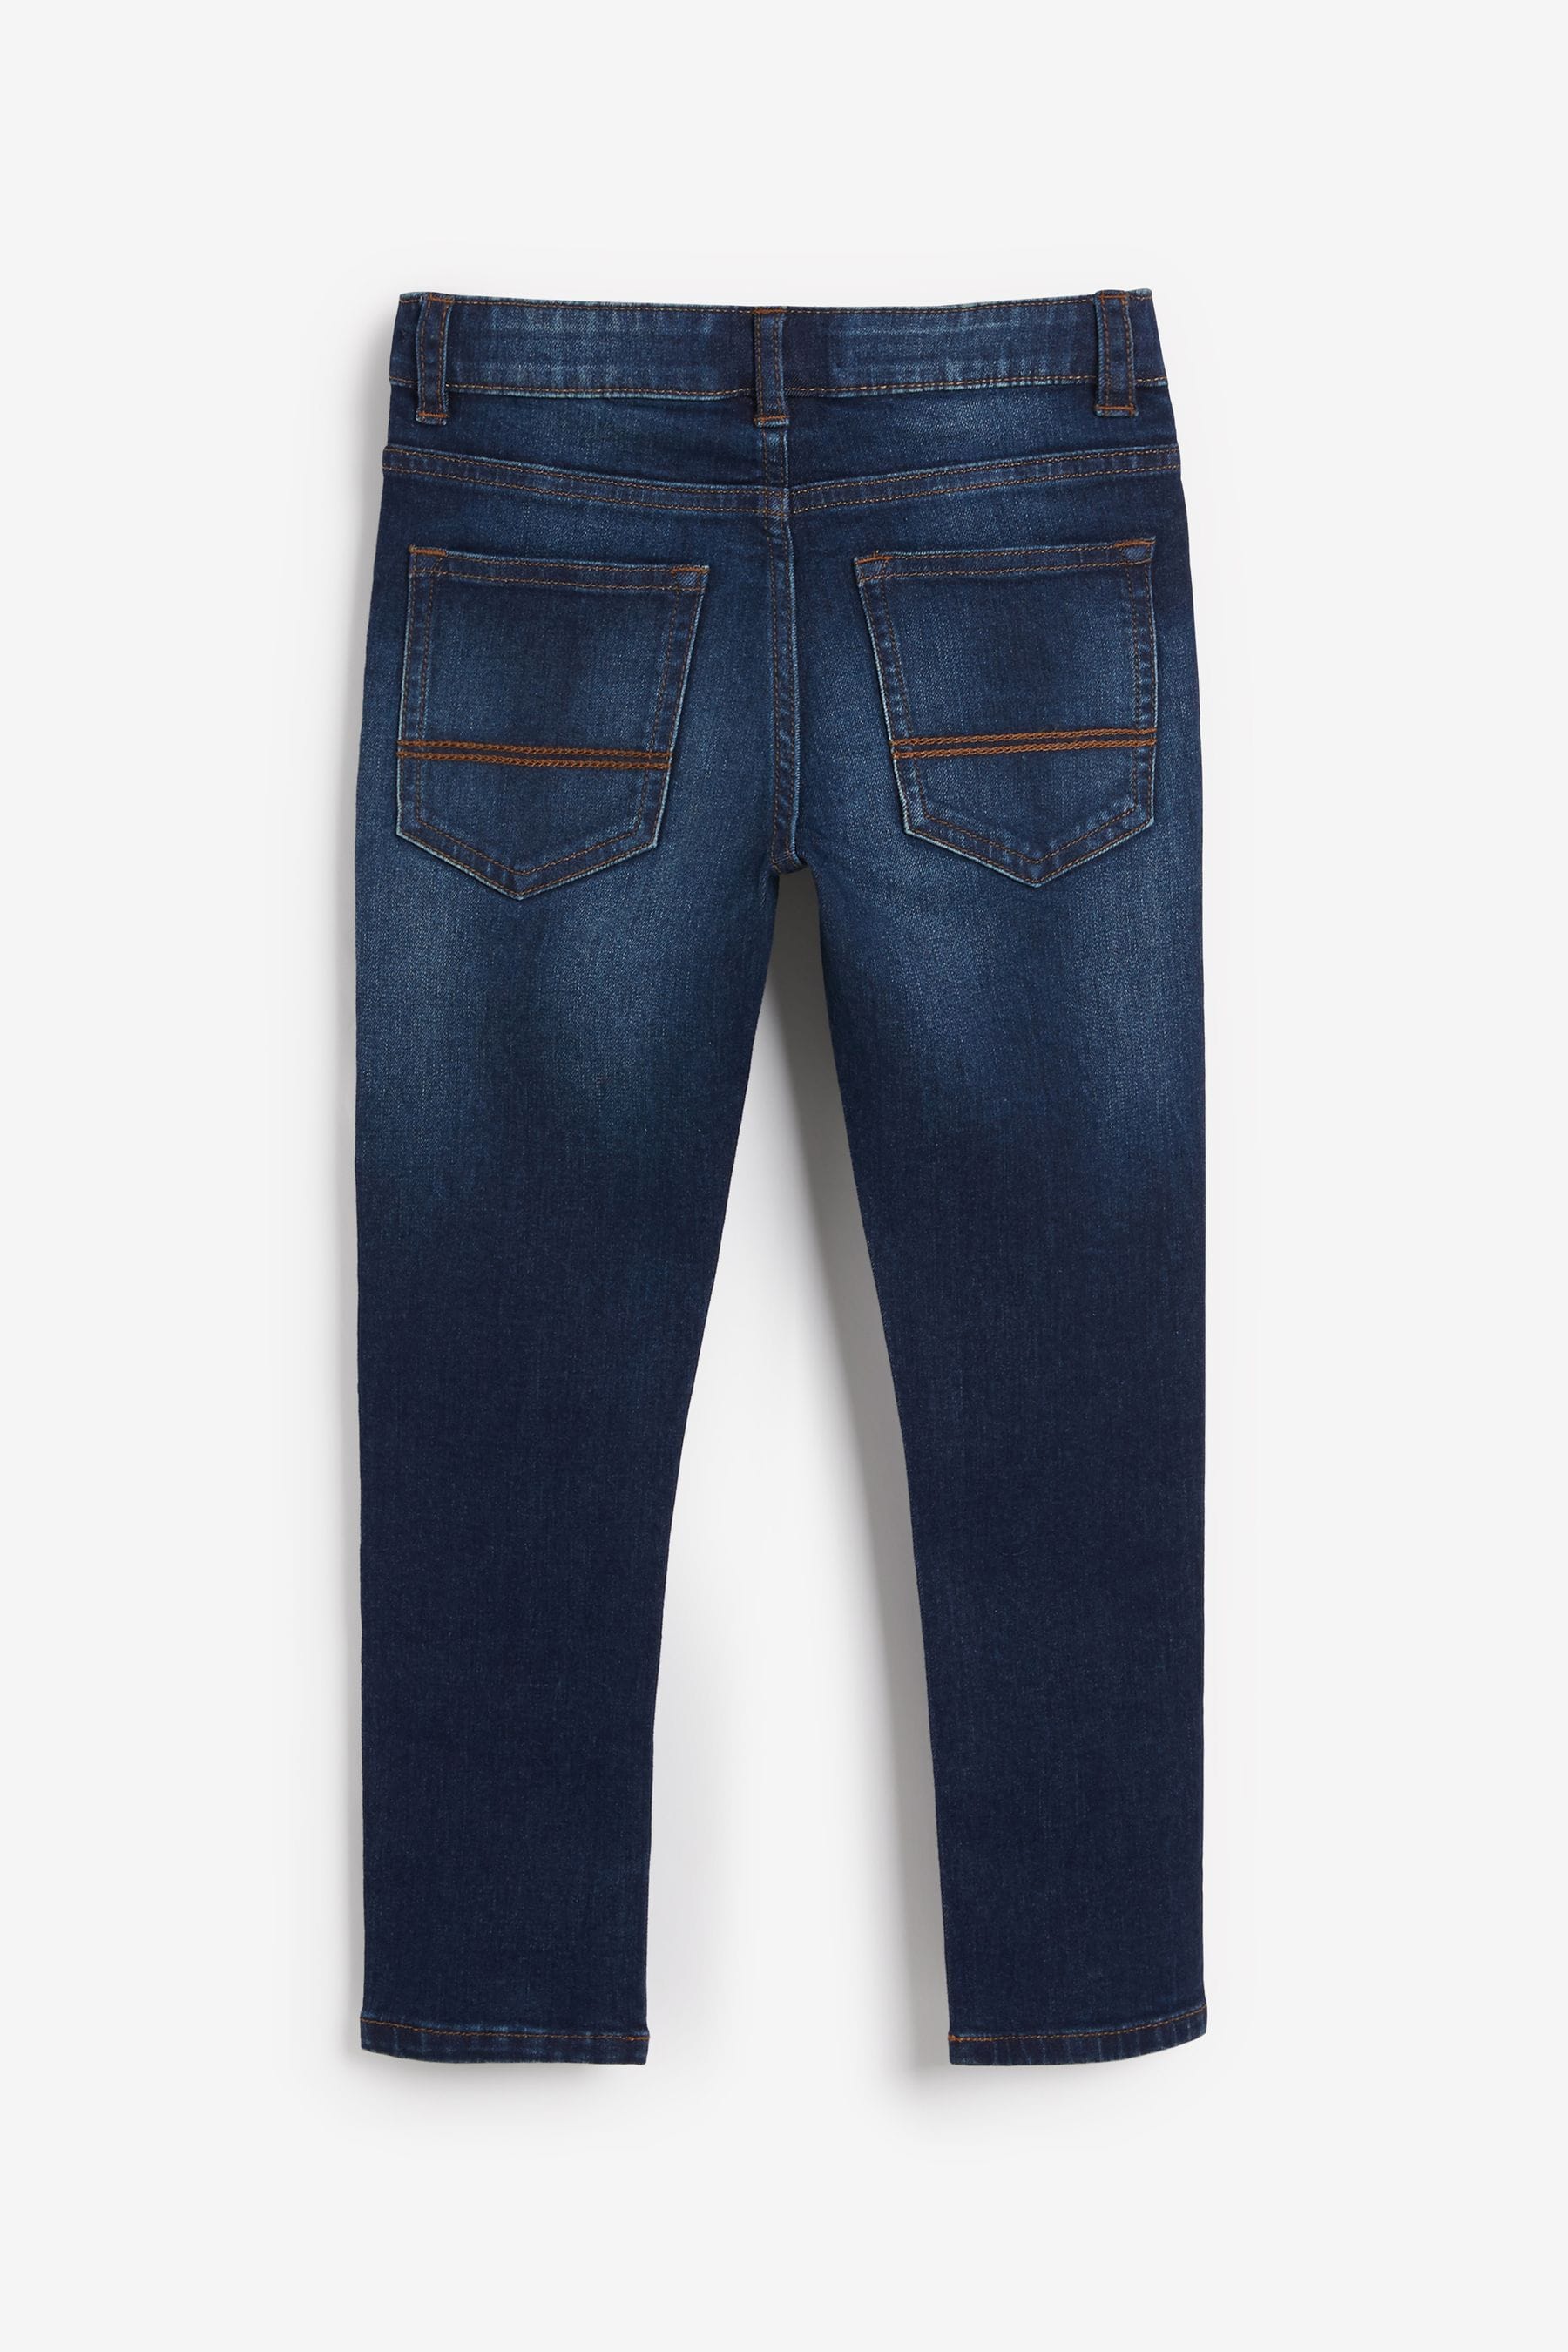 Buy Blue Indigo Skinny Fit Cotton Rich Stretch Jeans (3-17yrs) from the ...